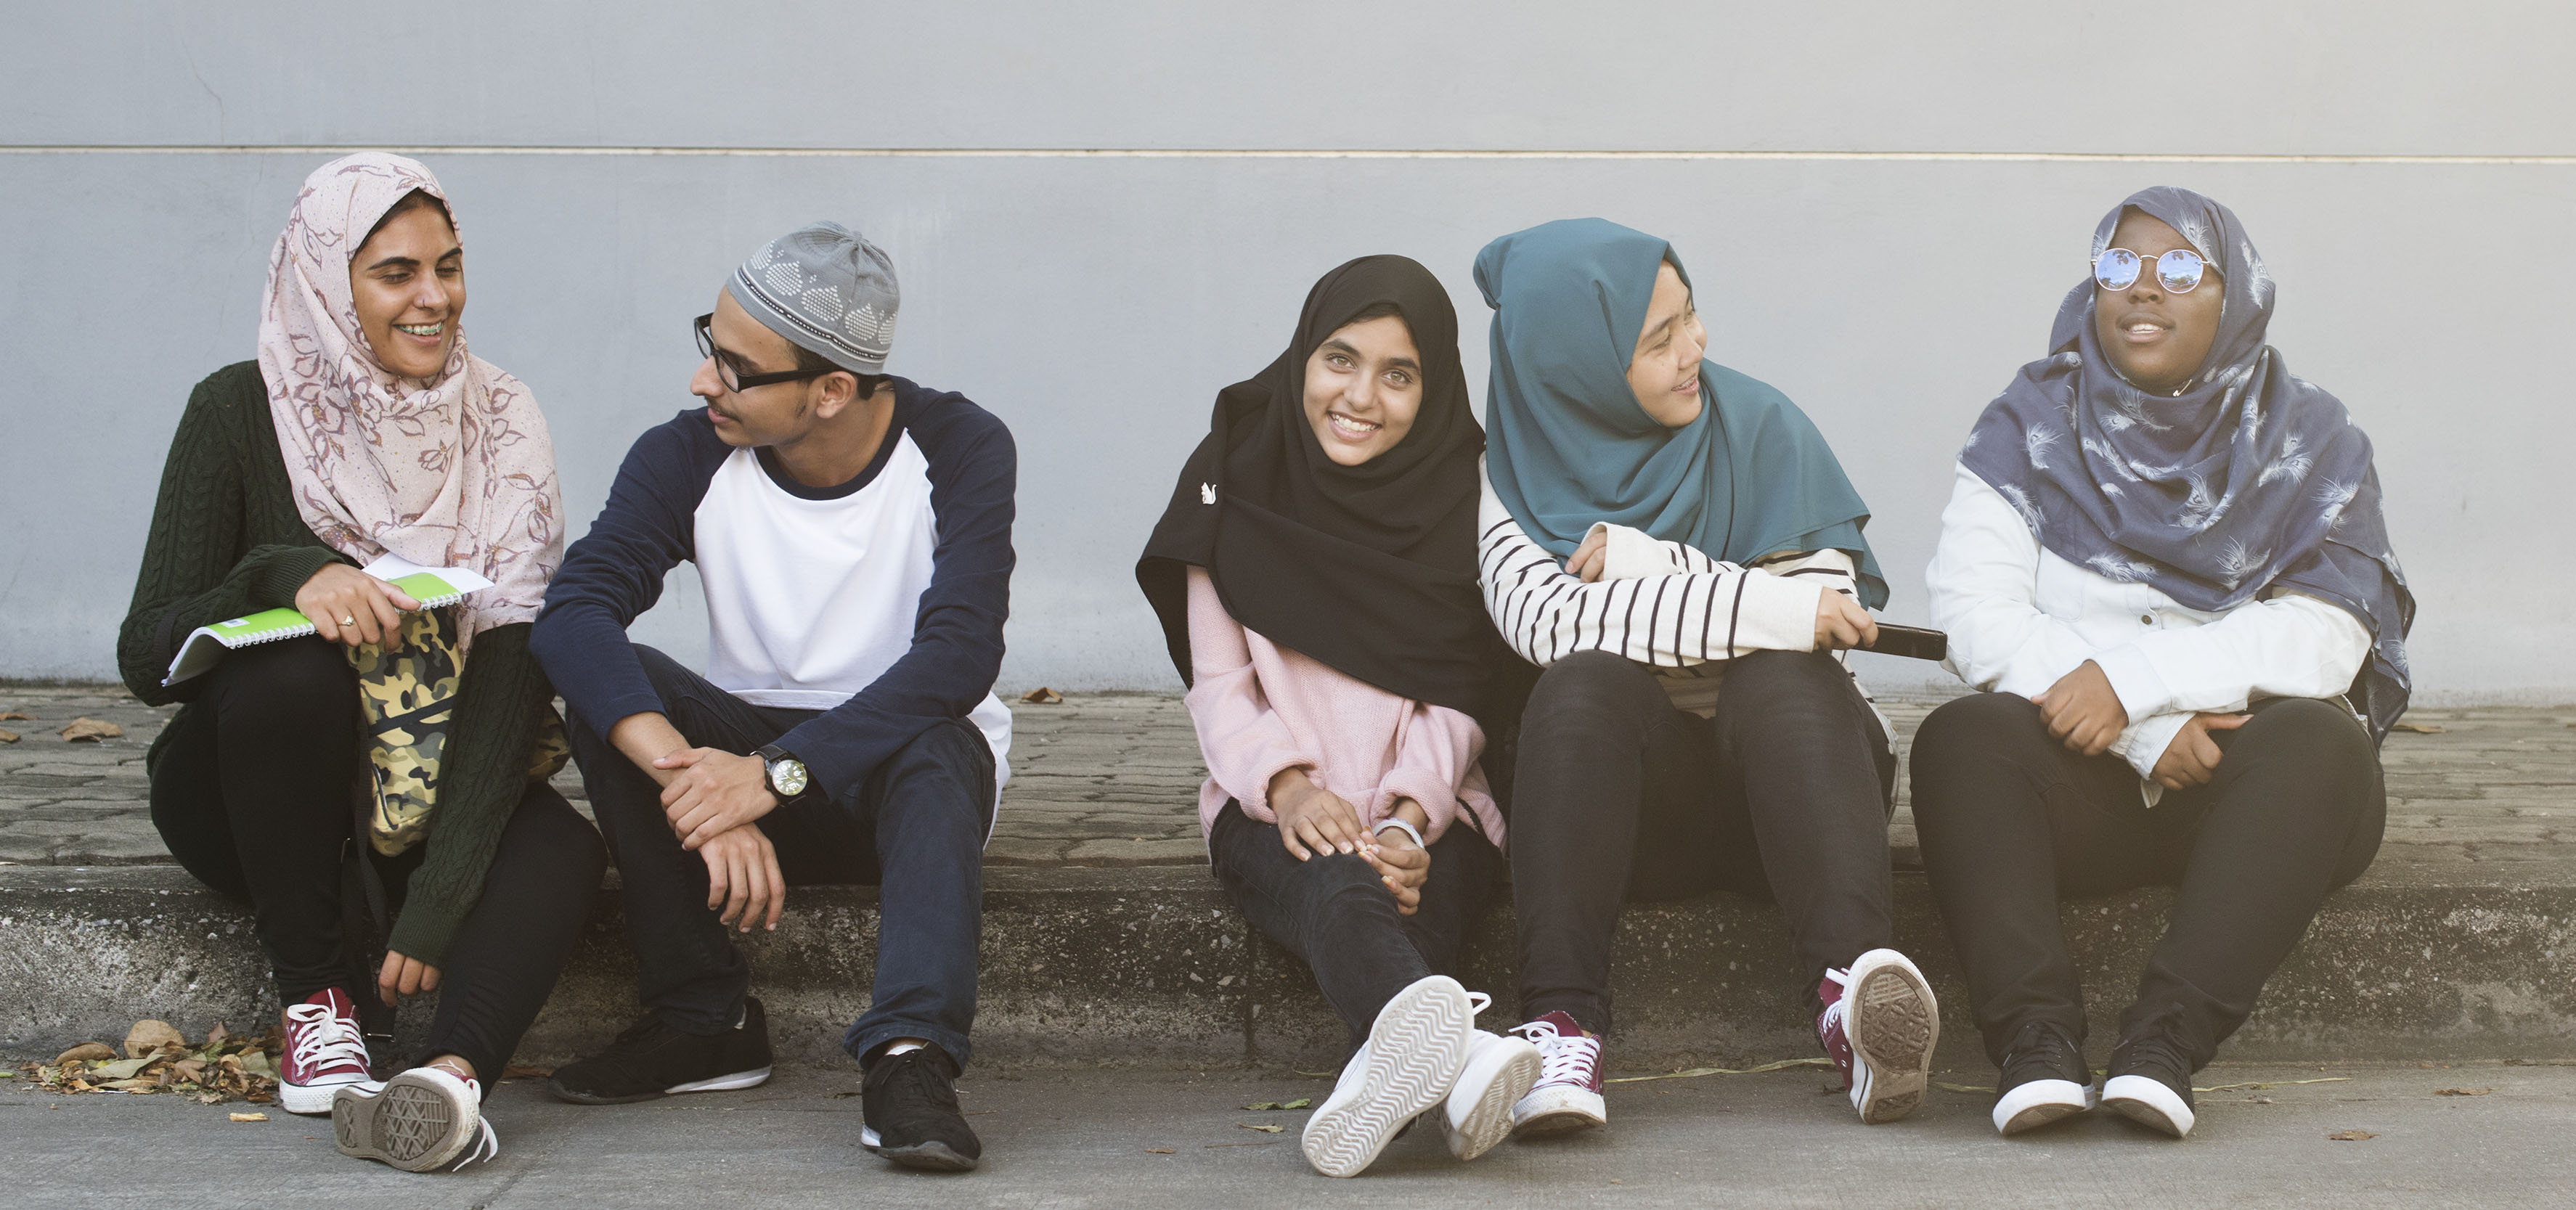 Sex Cheyma Haj - 11 Ways to Build modesty in Young Muslims | SoundVision.com